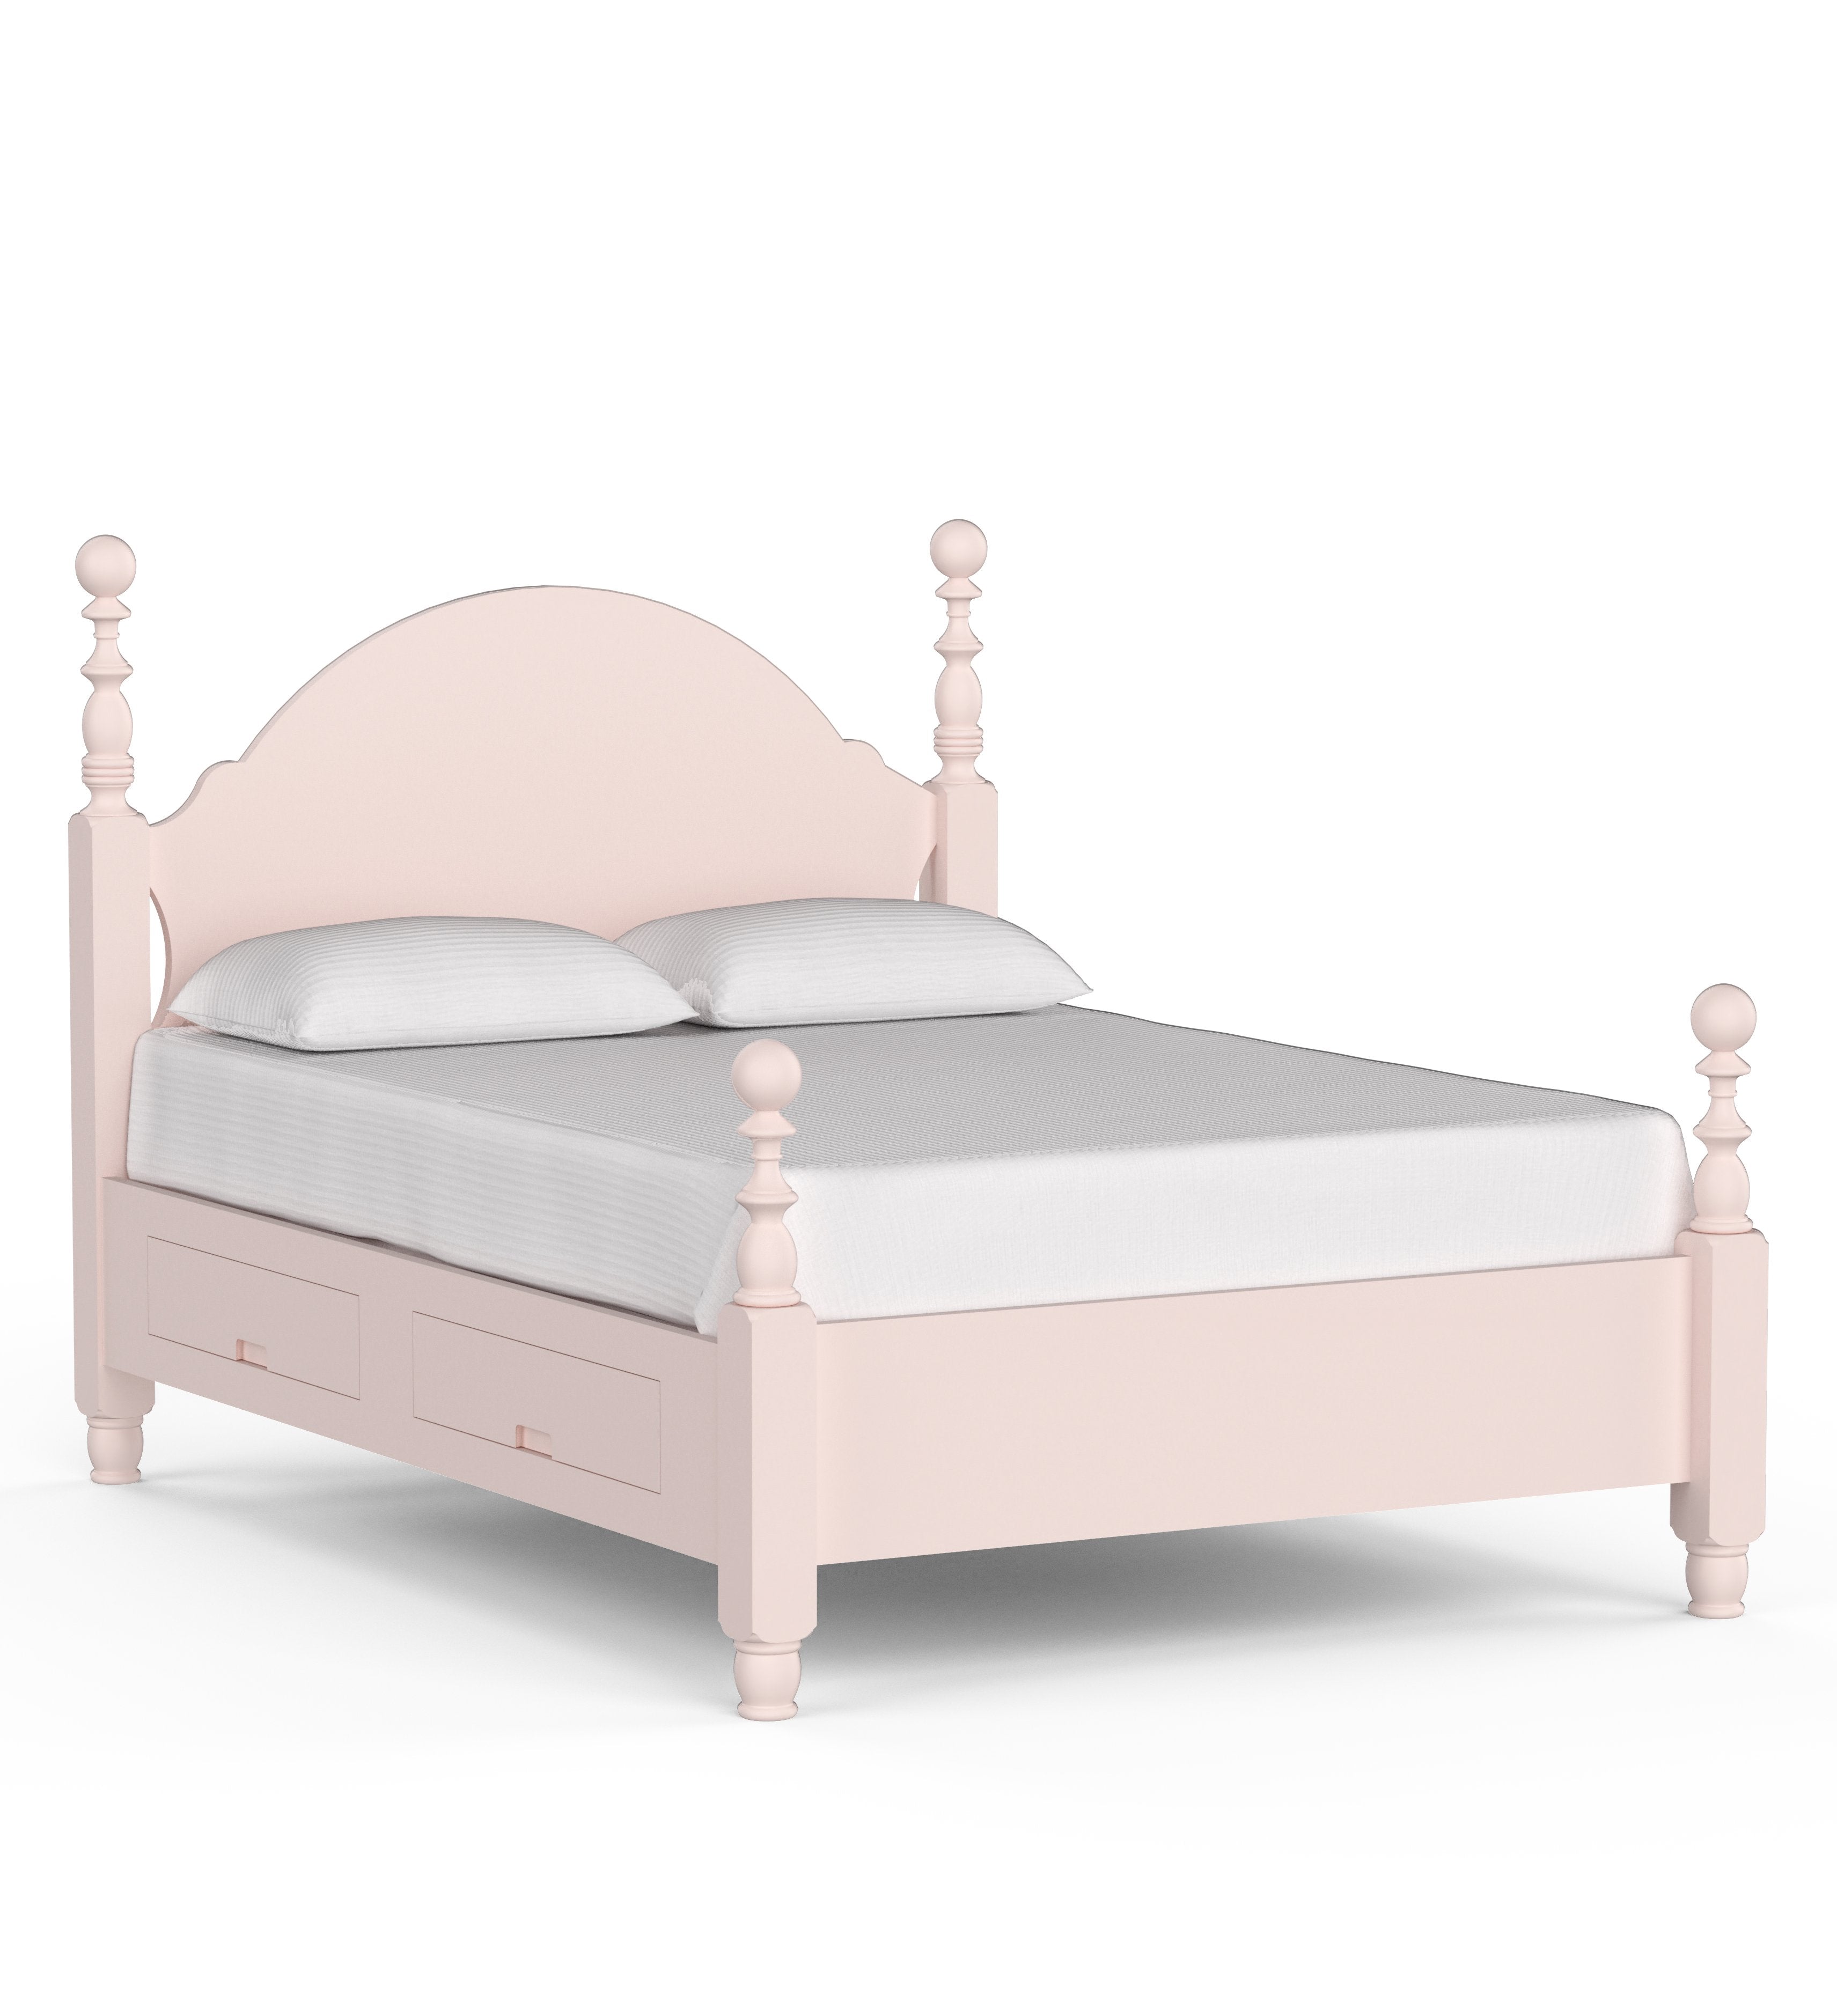 Maine Cottage Eliza Cannonball Bed with Storage | Maine Cottage® 